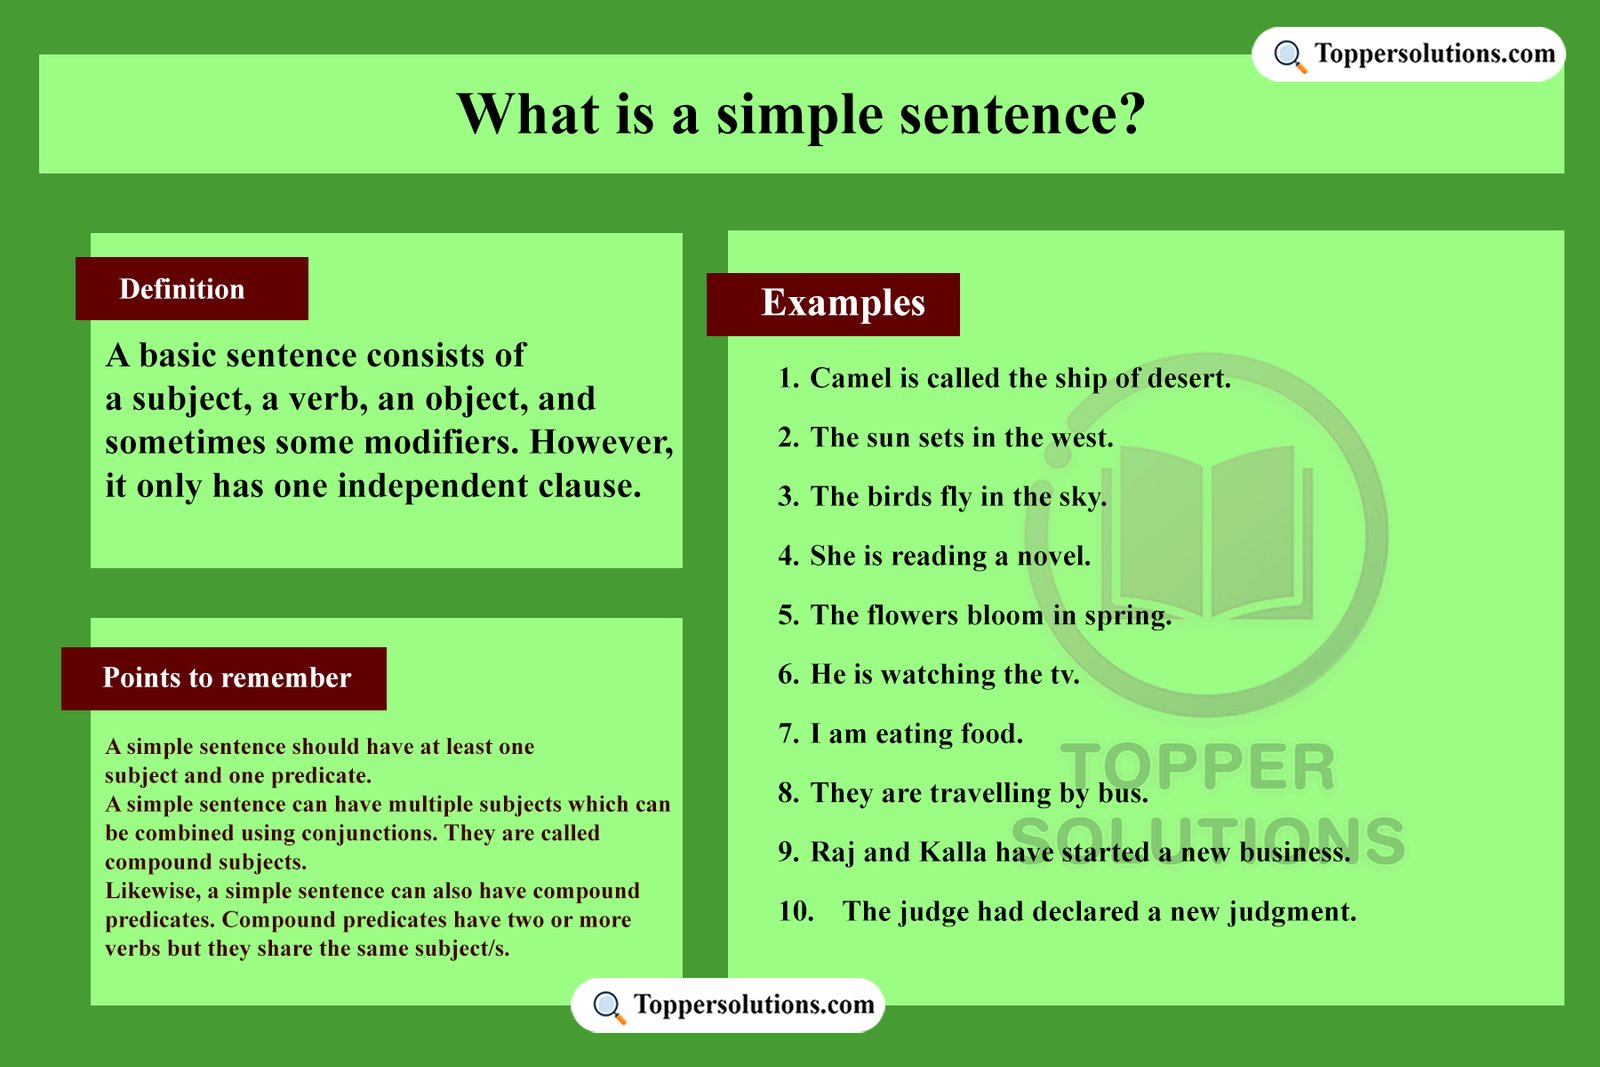 What is a simple sentence